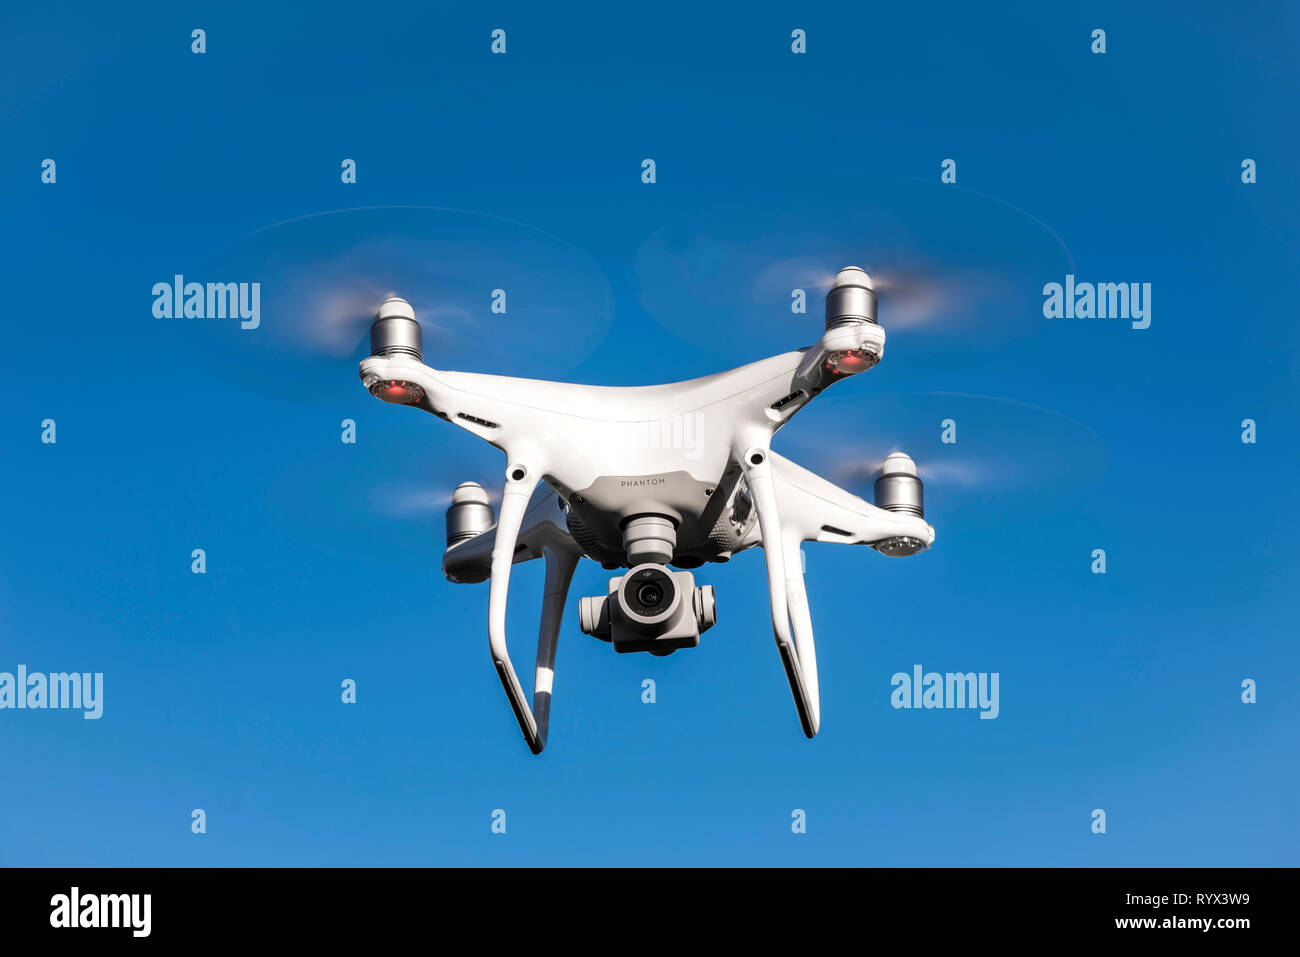 Dji phantom 4 pro drone flying hi-res stock photography and images - Alamy